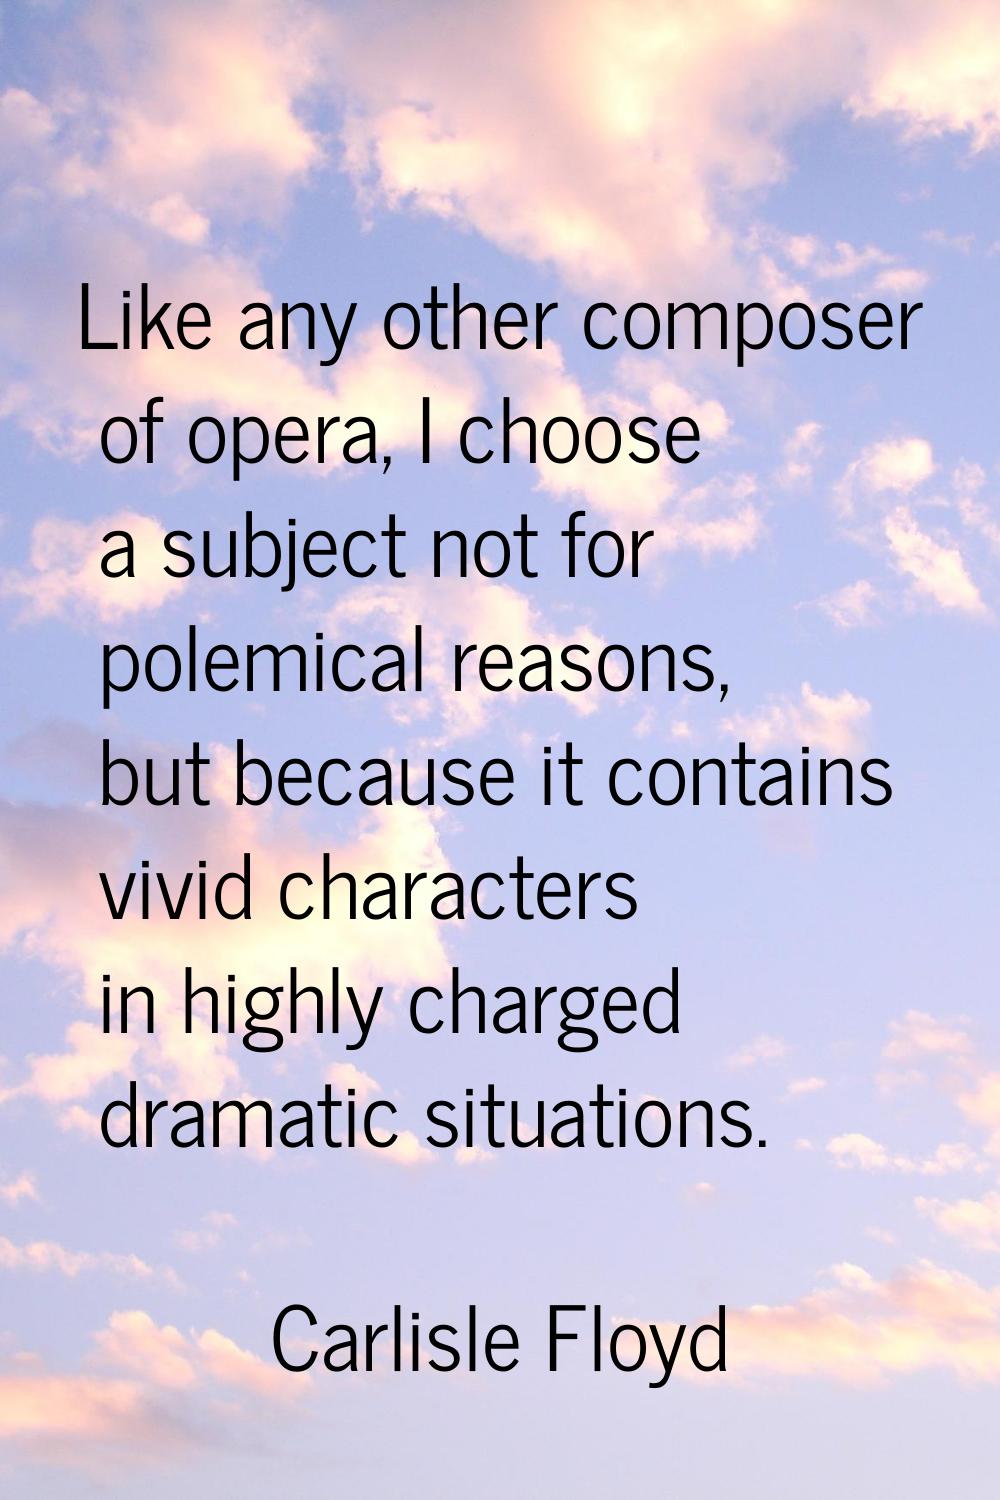 Like any other composer of opera, I choose a subject not for polemical reasons, but because it cont